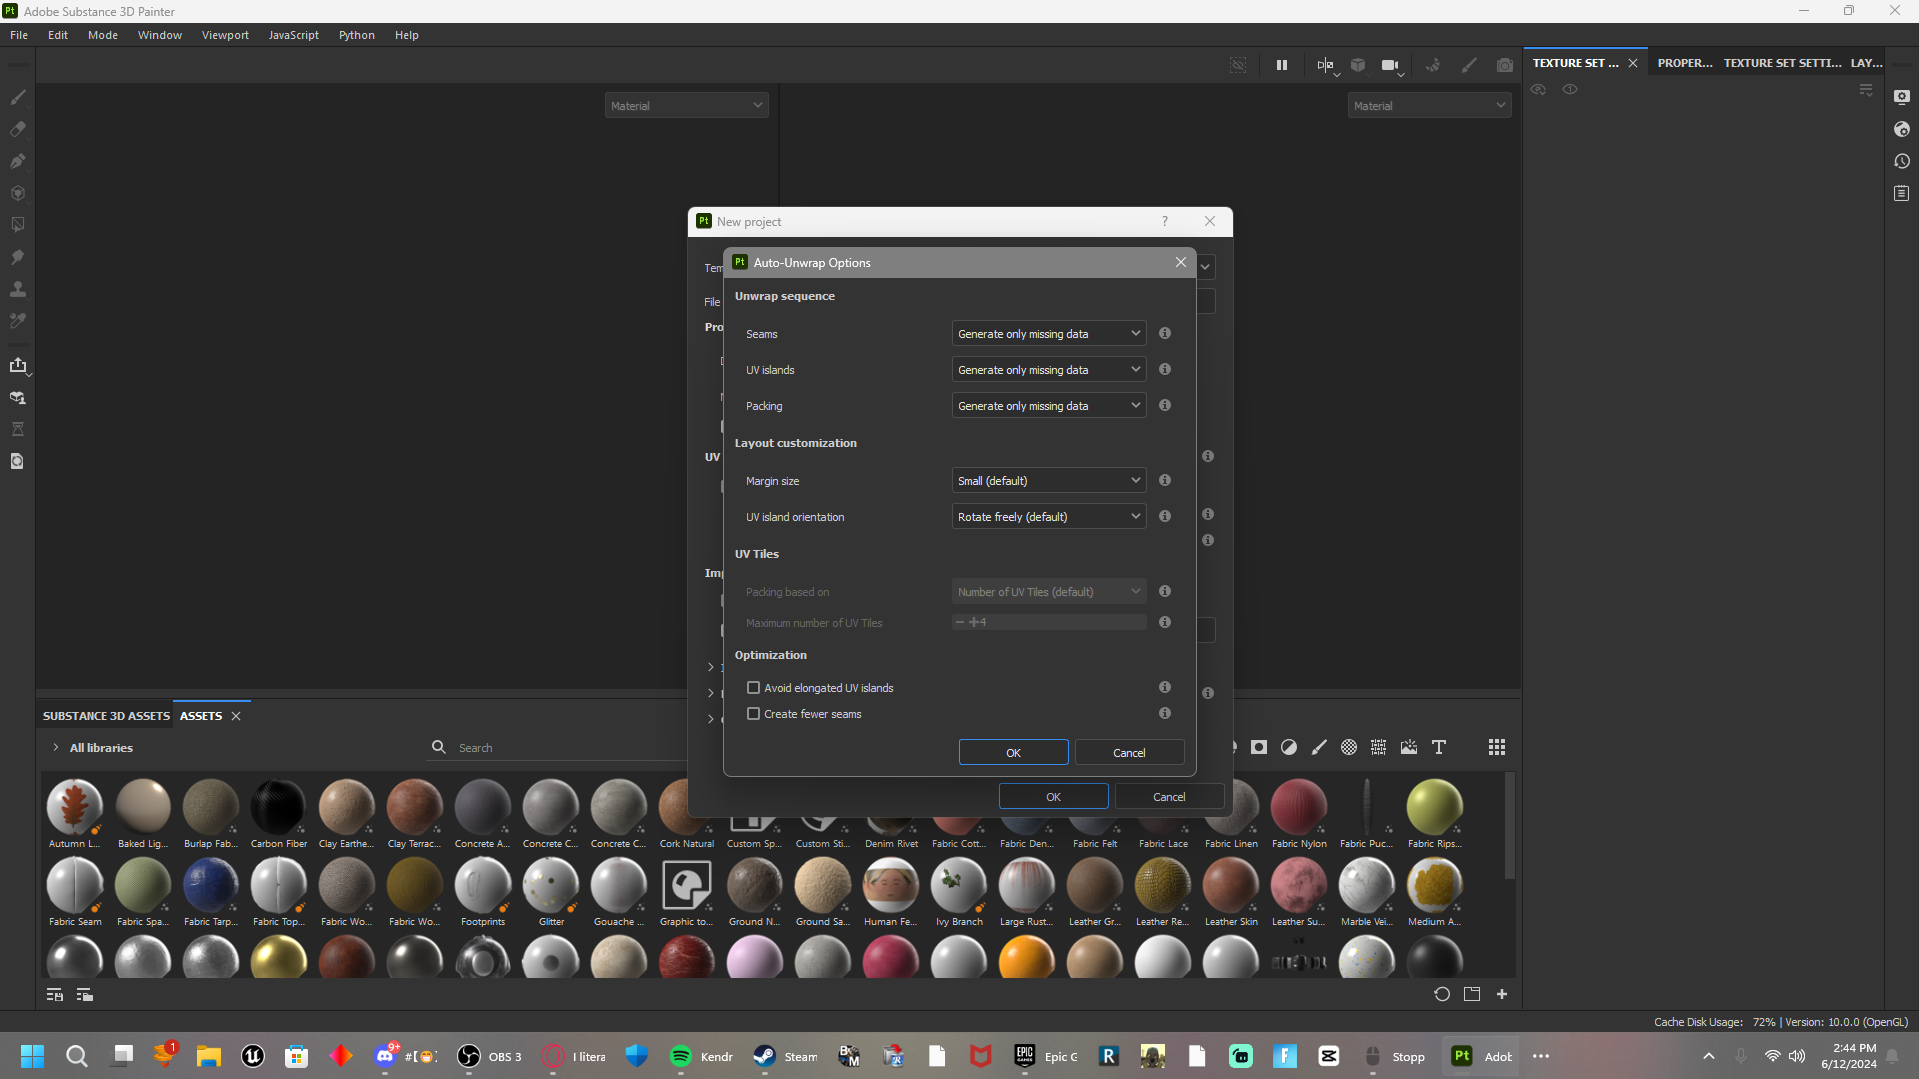 I literally cannot texture in substance 3d painter - Adobe Community ...